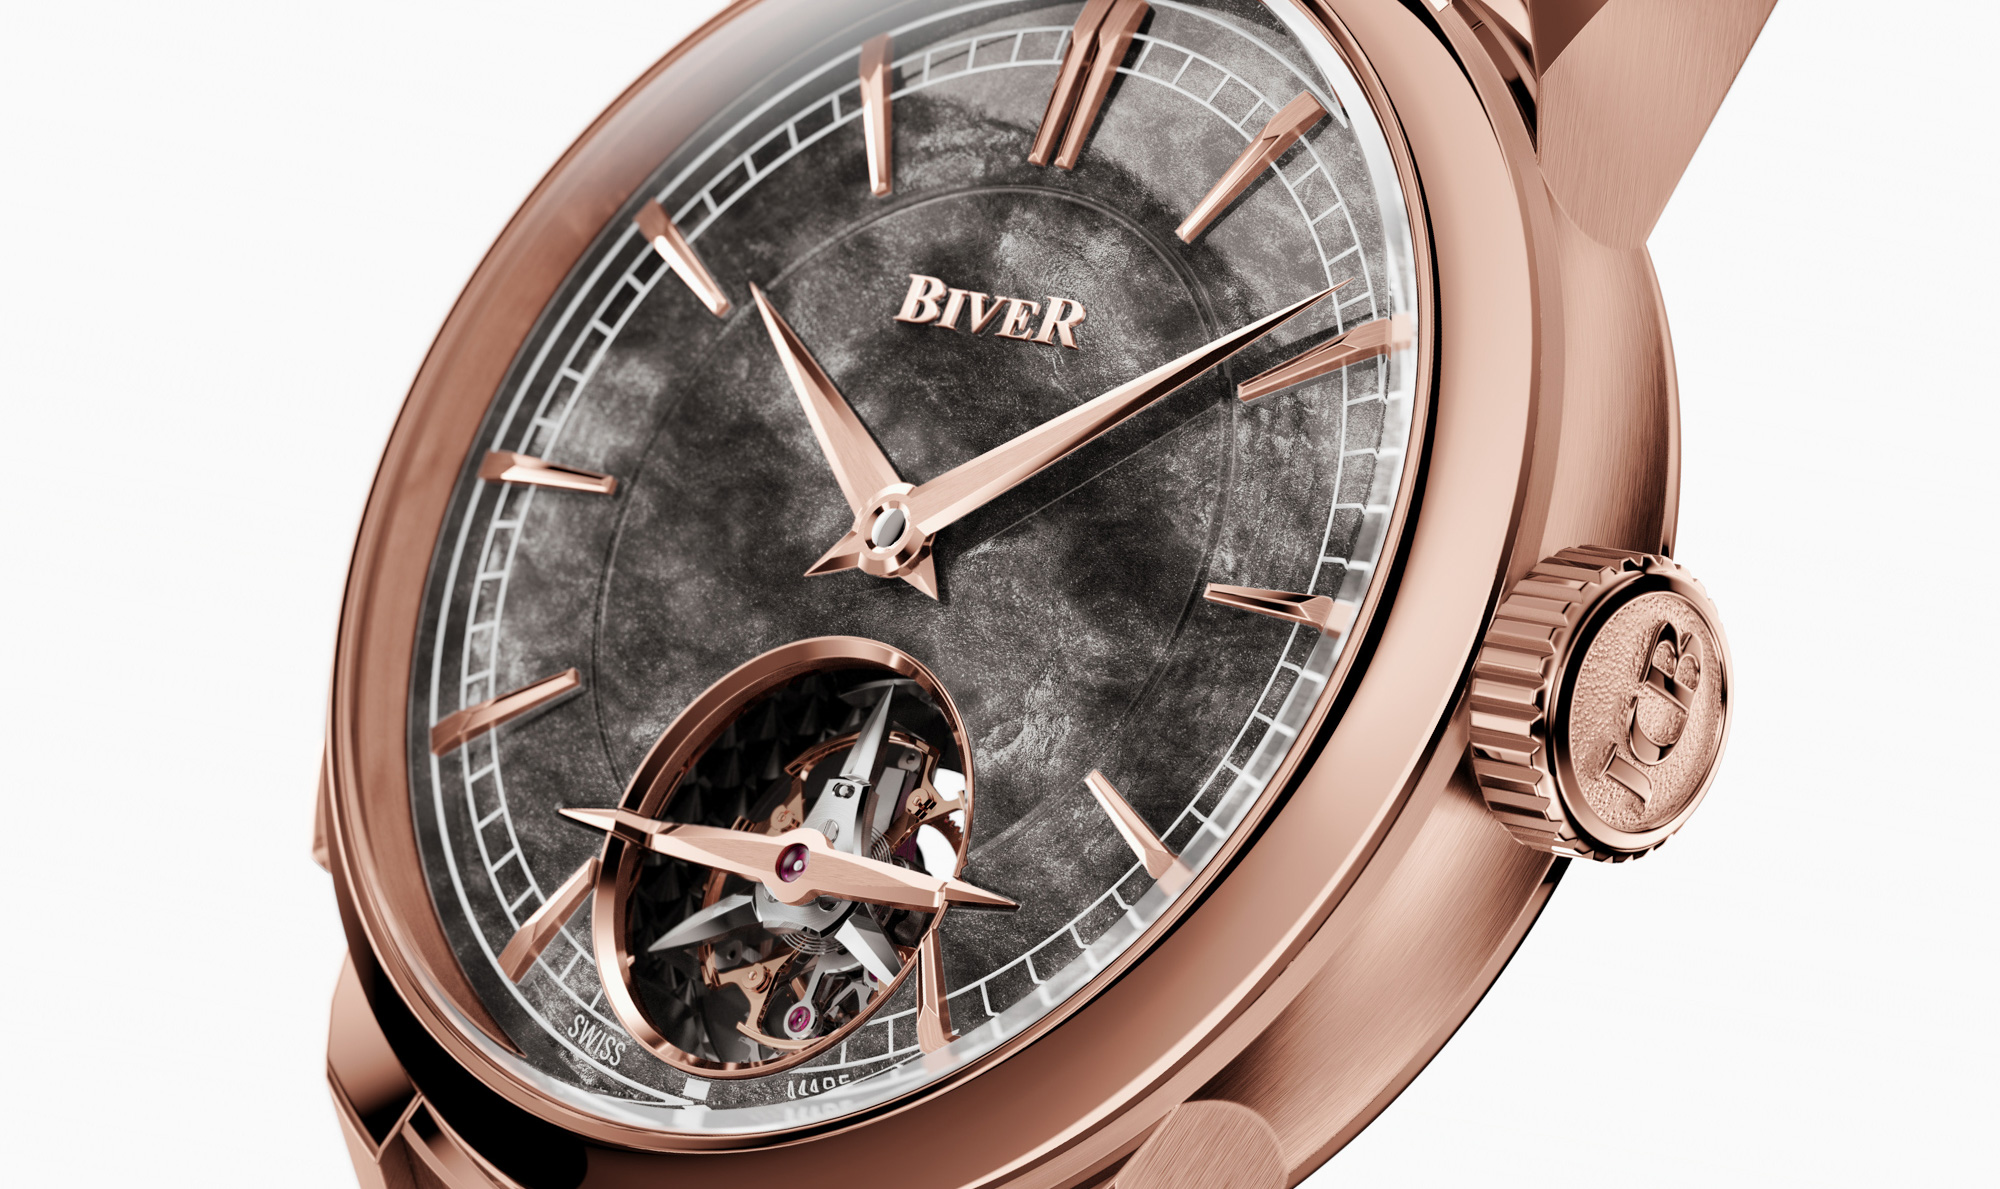 Introducing The Carillon Tourbillon Biver, The First Watch of